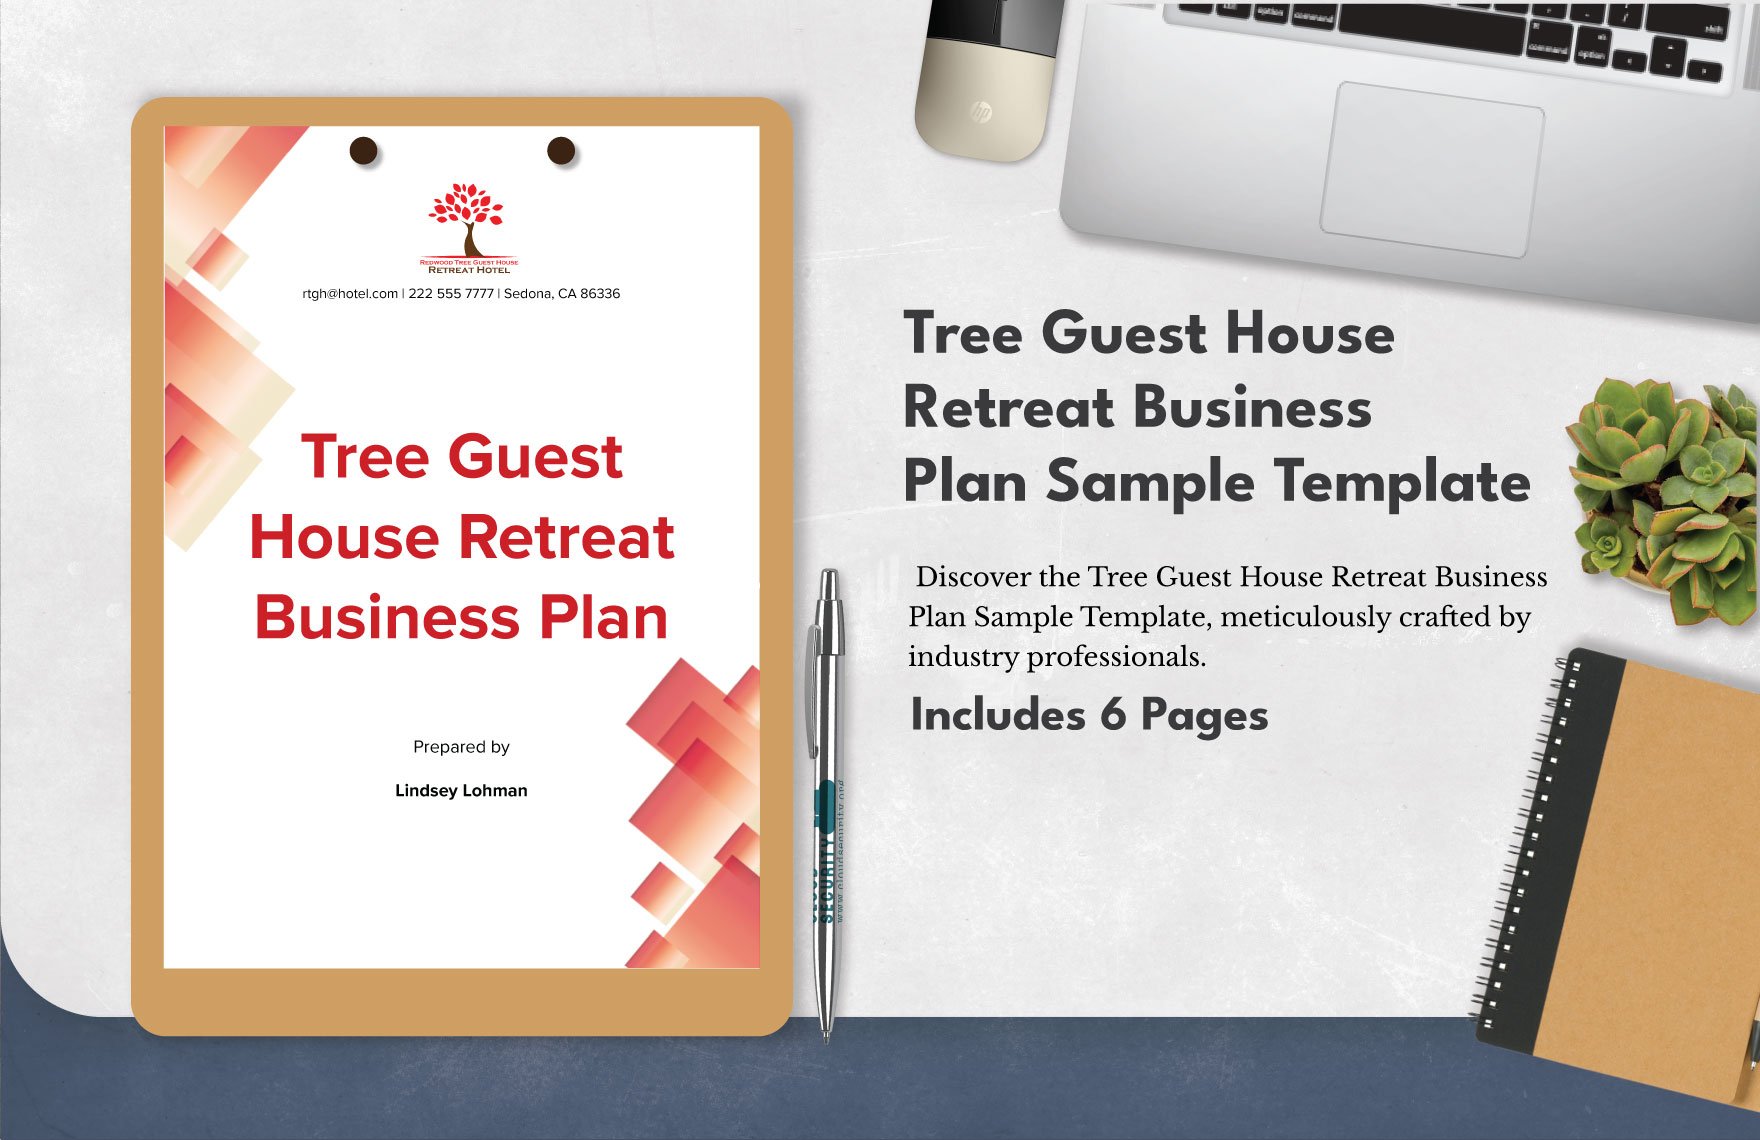 Tree Guest House Retreat Business Plan Sample Template